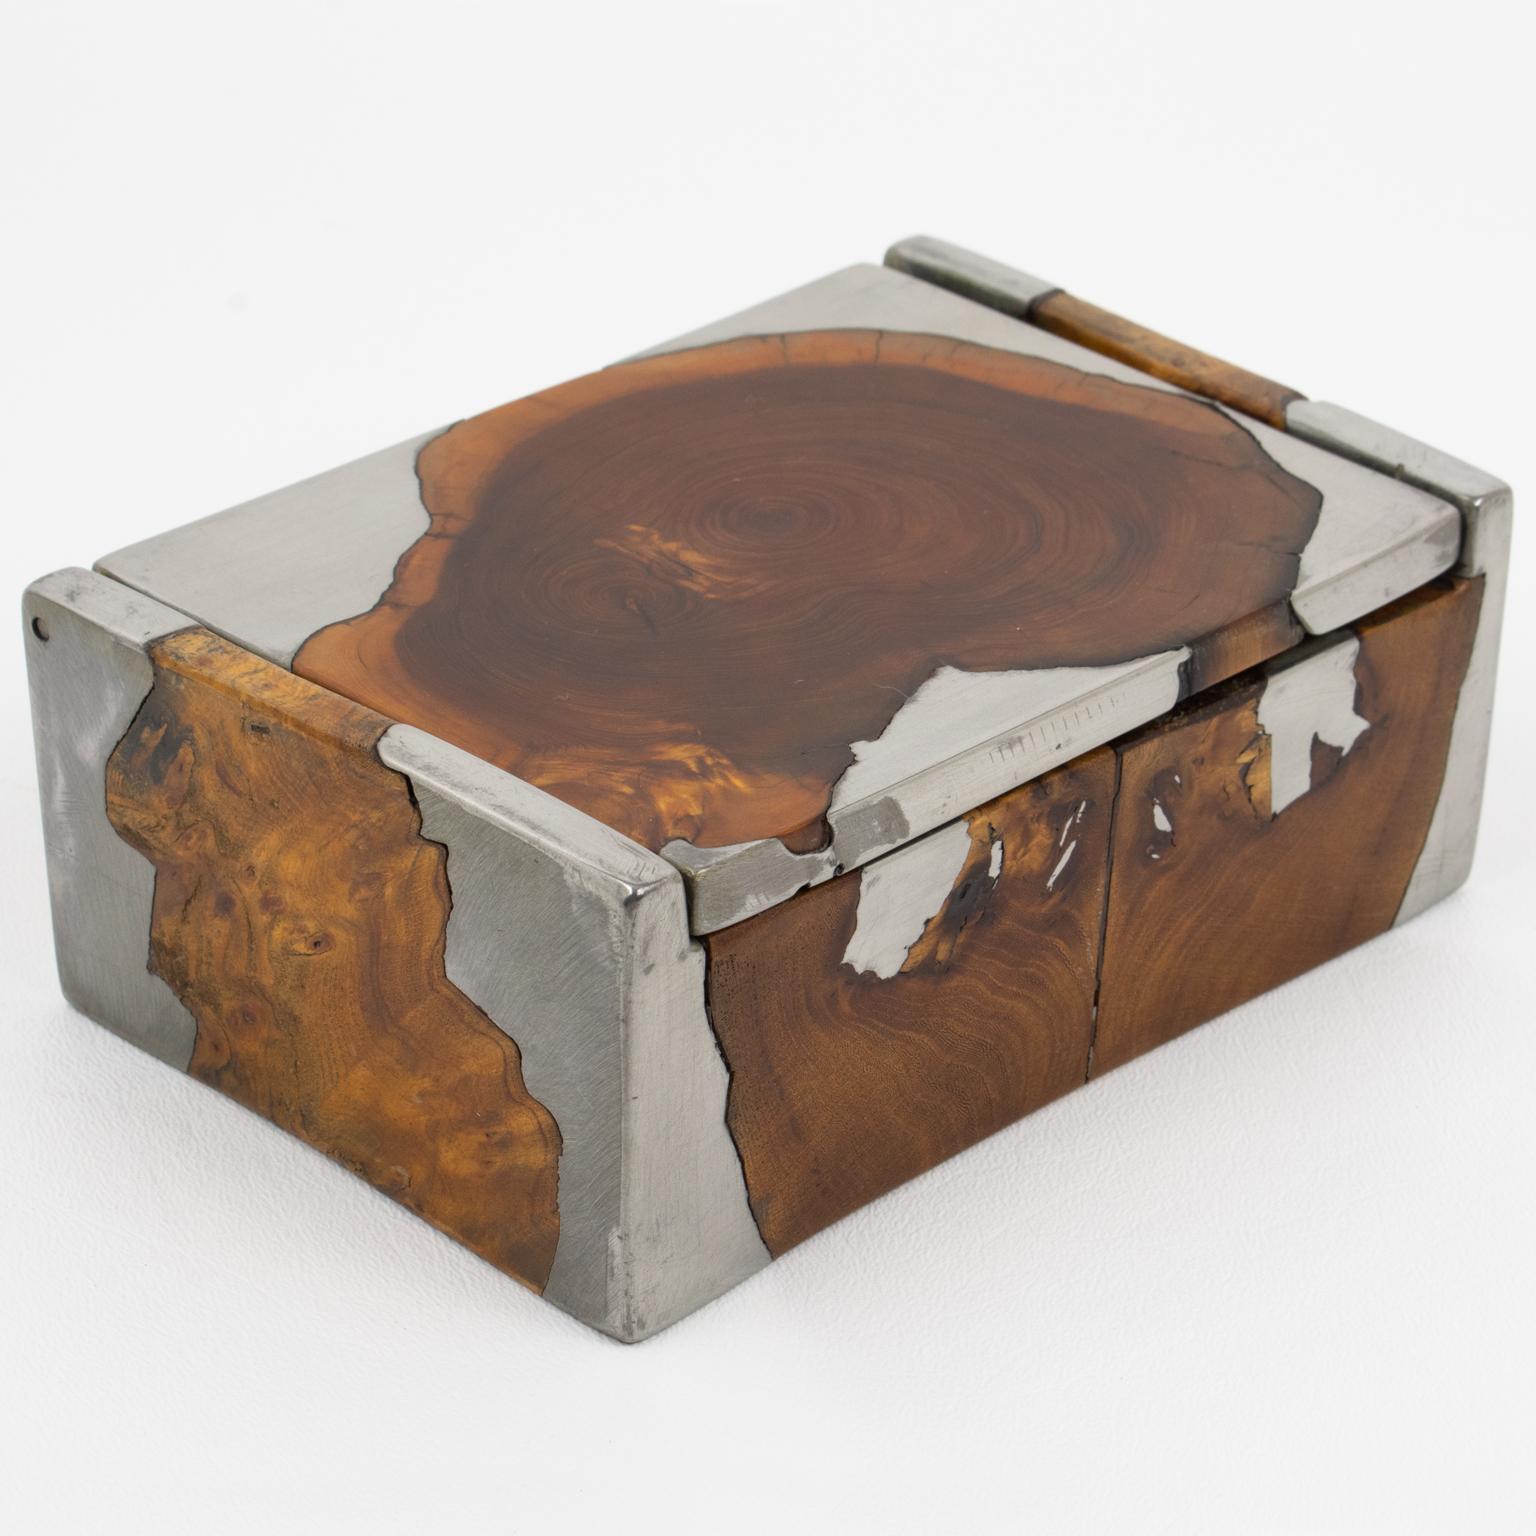 This very unusual brutalist-lidded box was hand-crafted in France in the 1960s. The piece boasts a rectangular shape with burl wood and pewter intricately mixed and displayed to form an impressive design with a distressed finish patina. The fusion